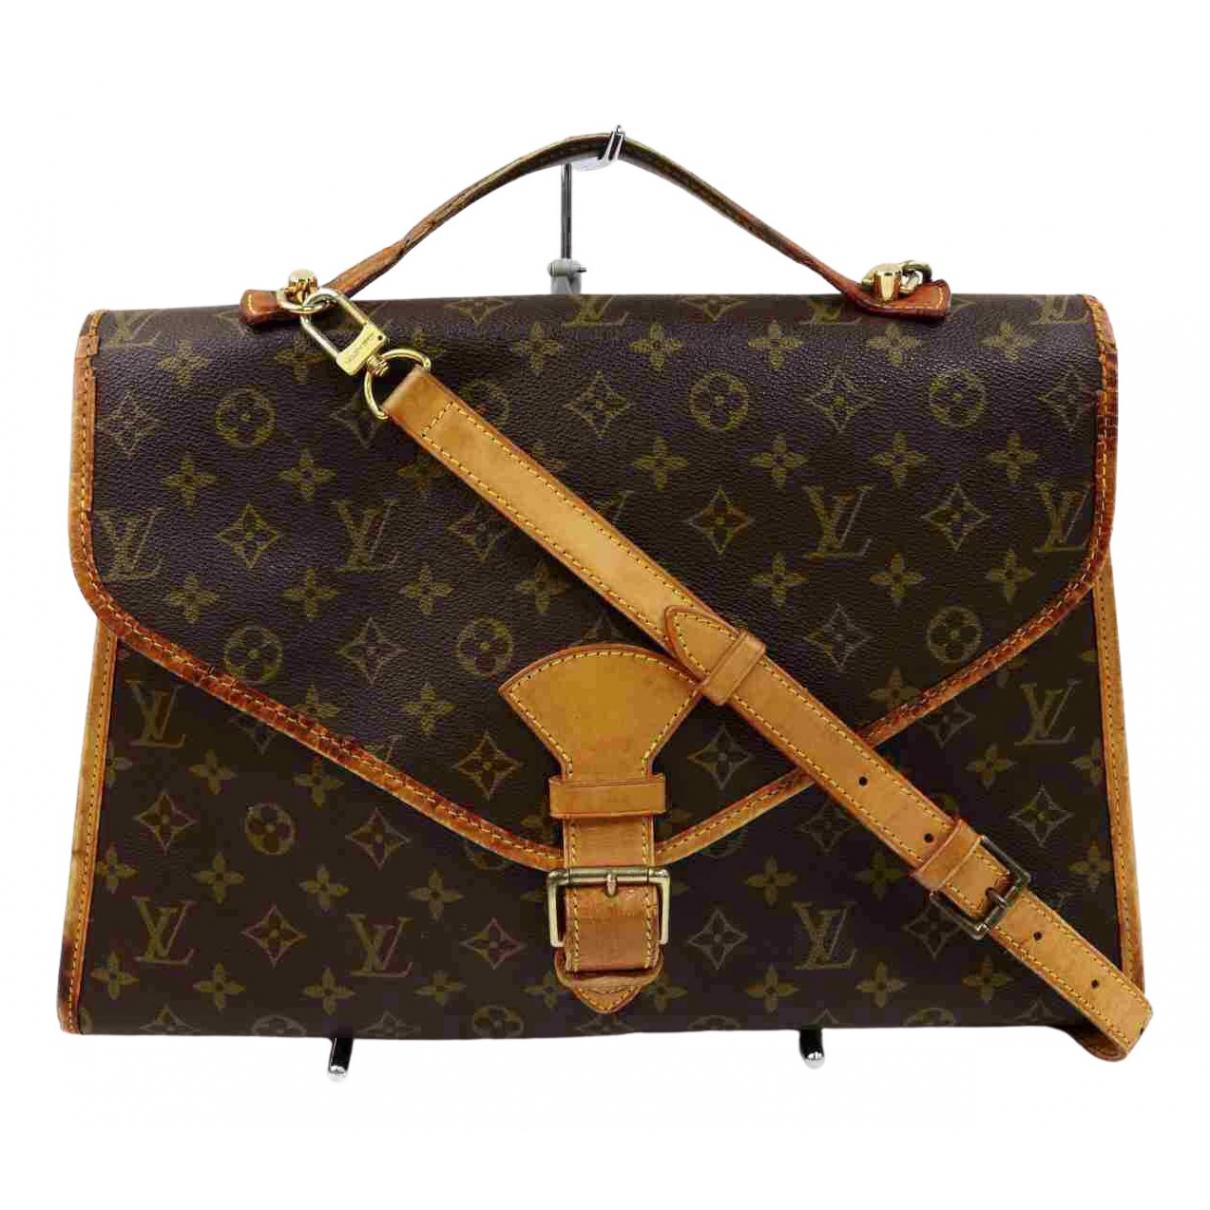 Vuitton Airplane - 4 For Sale on 1stDibs  louis vuitton airplane bag for  sale, airplane bag louis vuitton, louis vuitton airplane purse